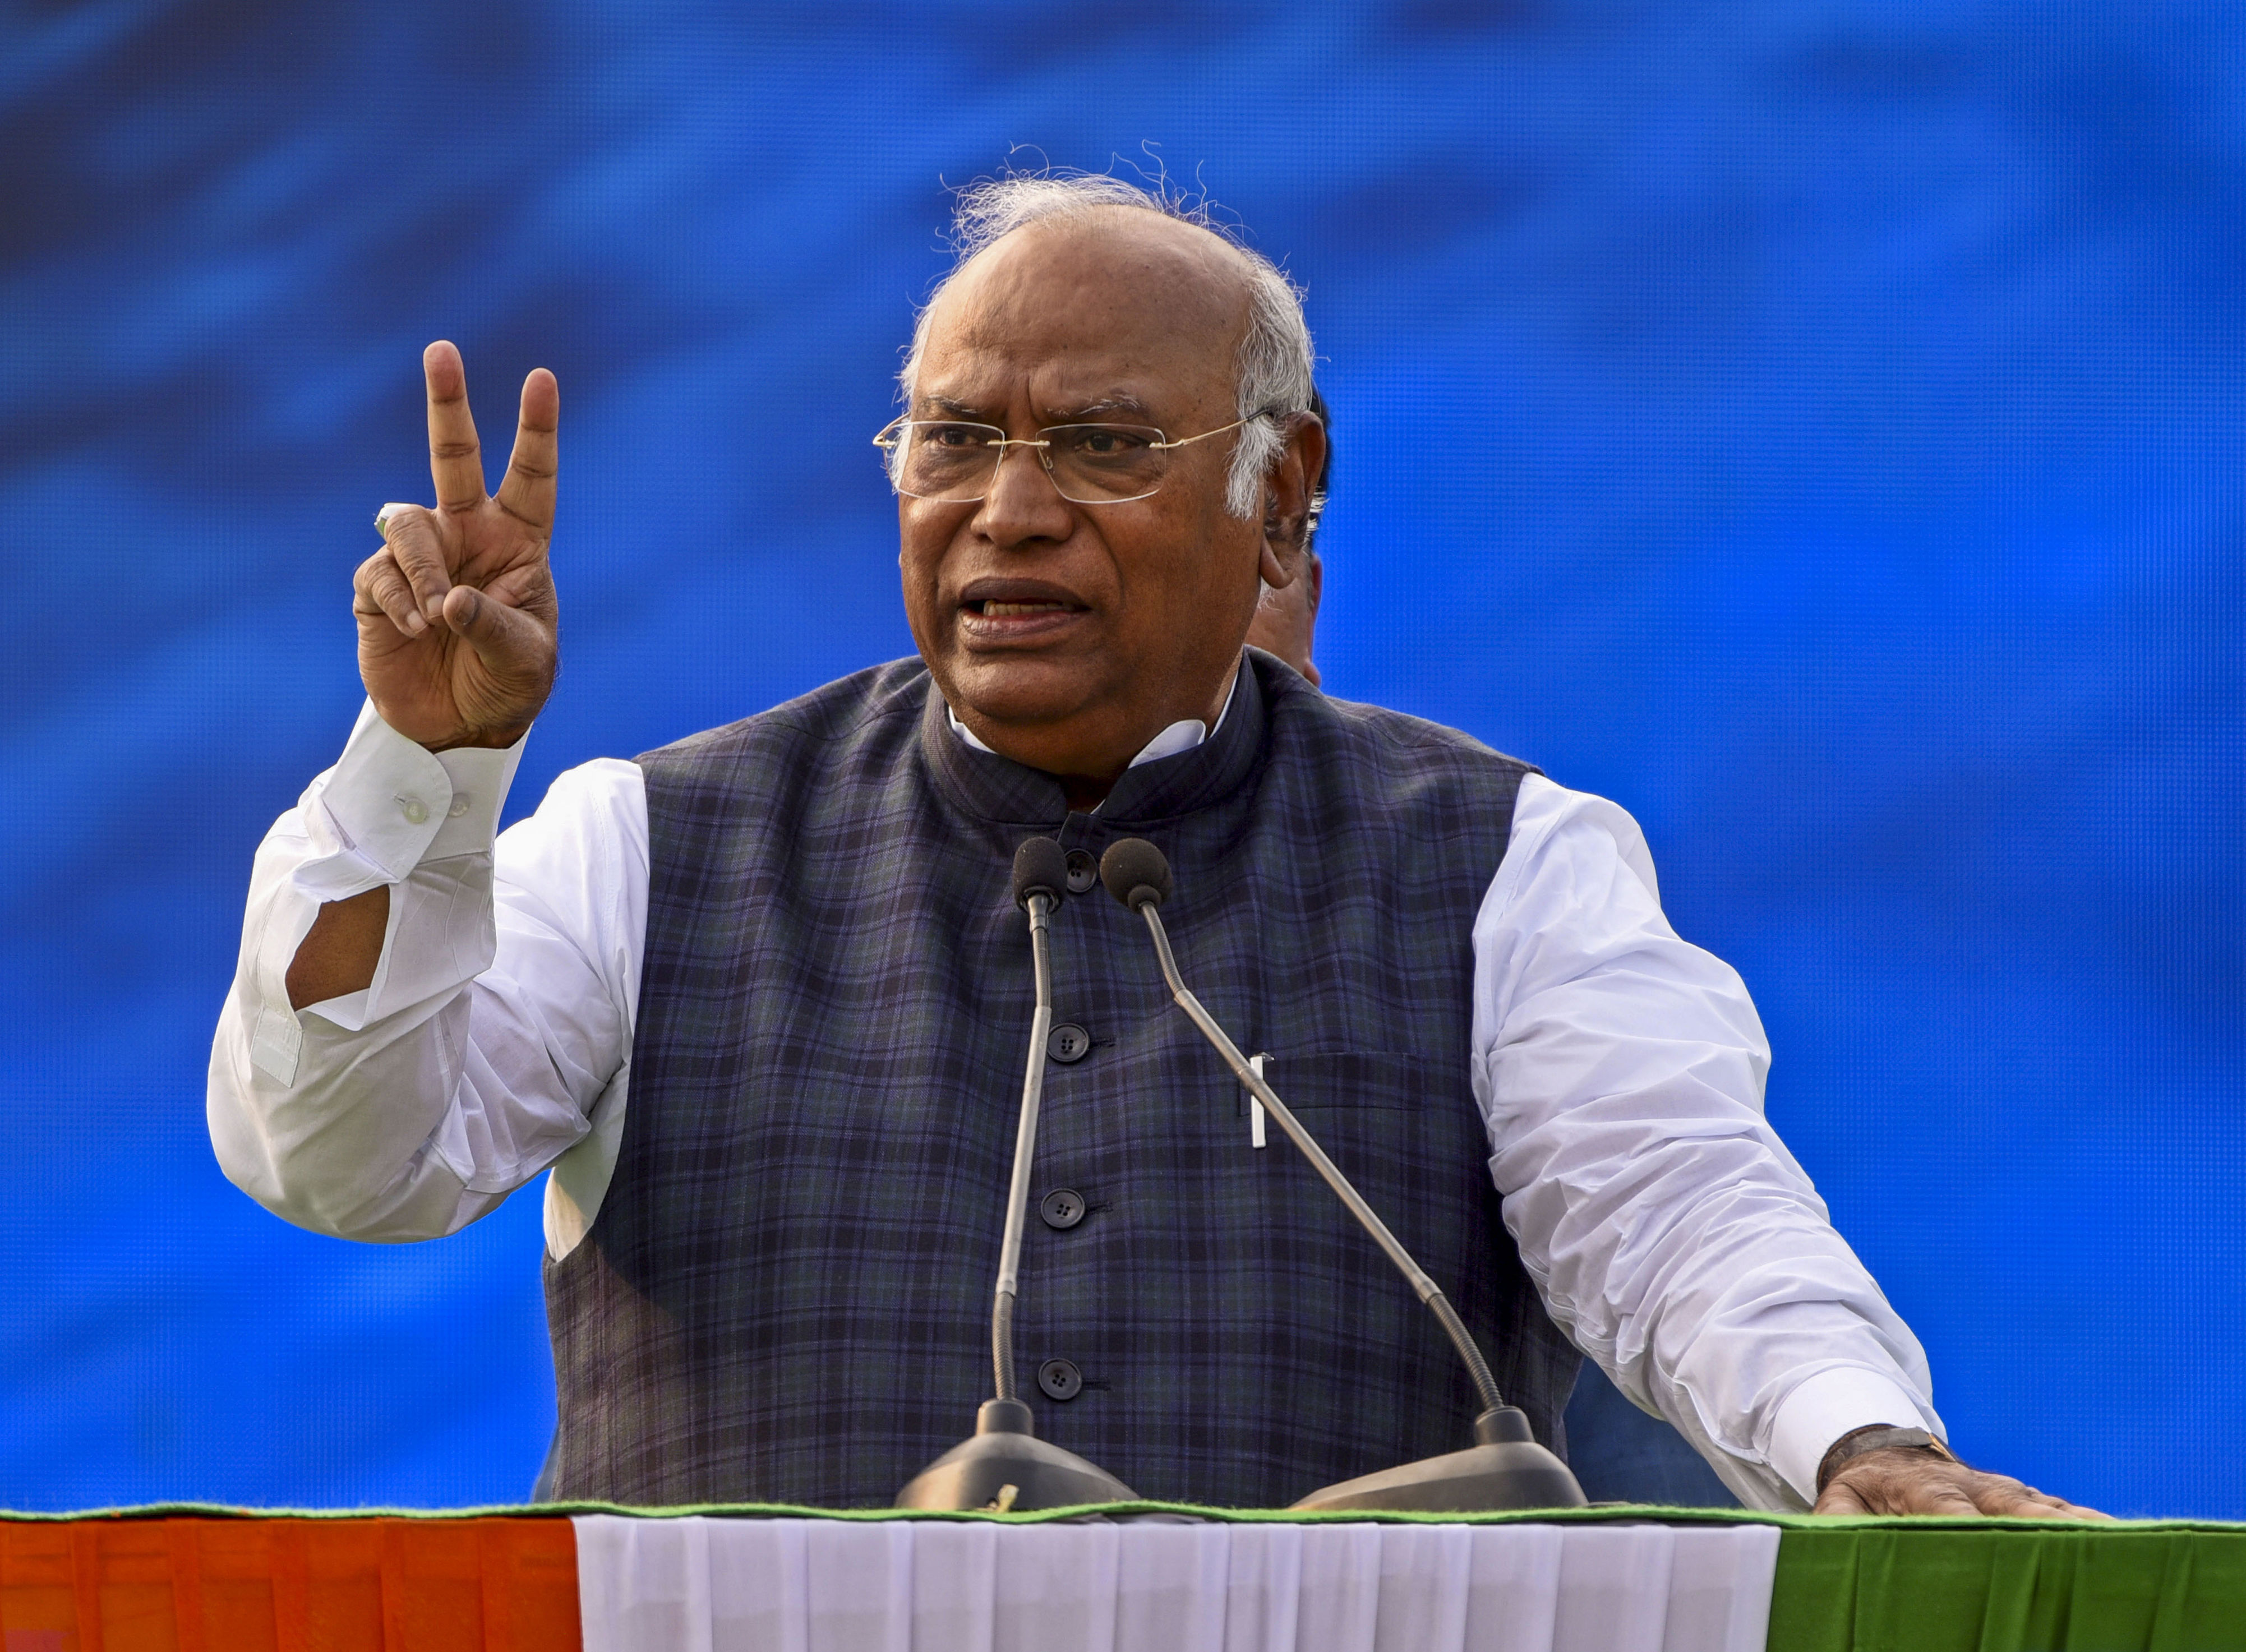 people's stomach can't be filled by showing god's picture, says cong prez kharge